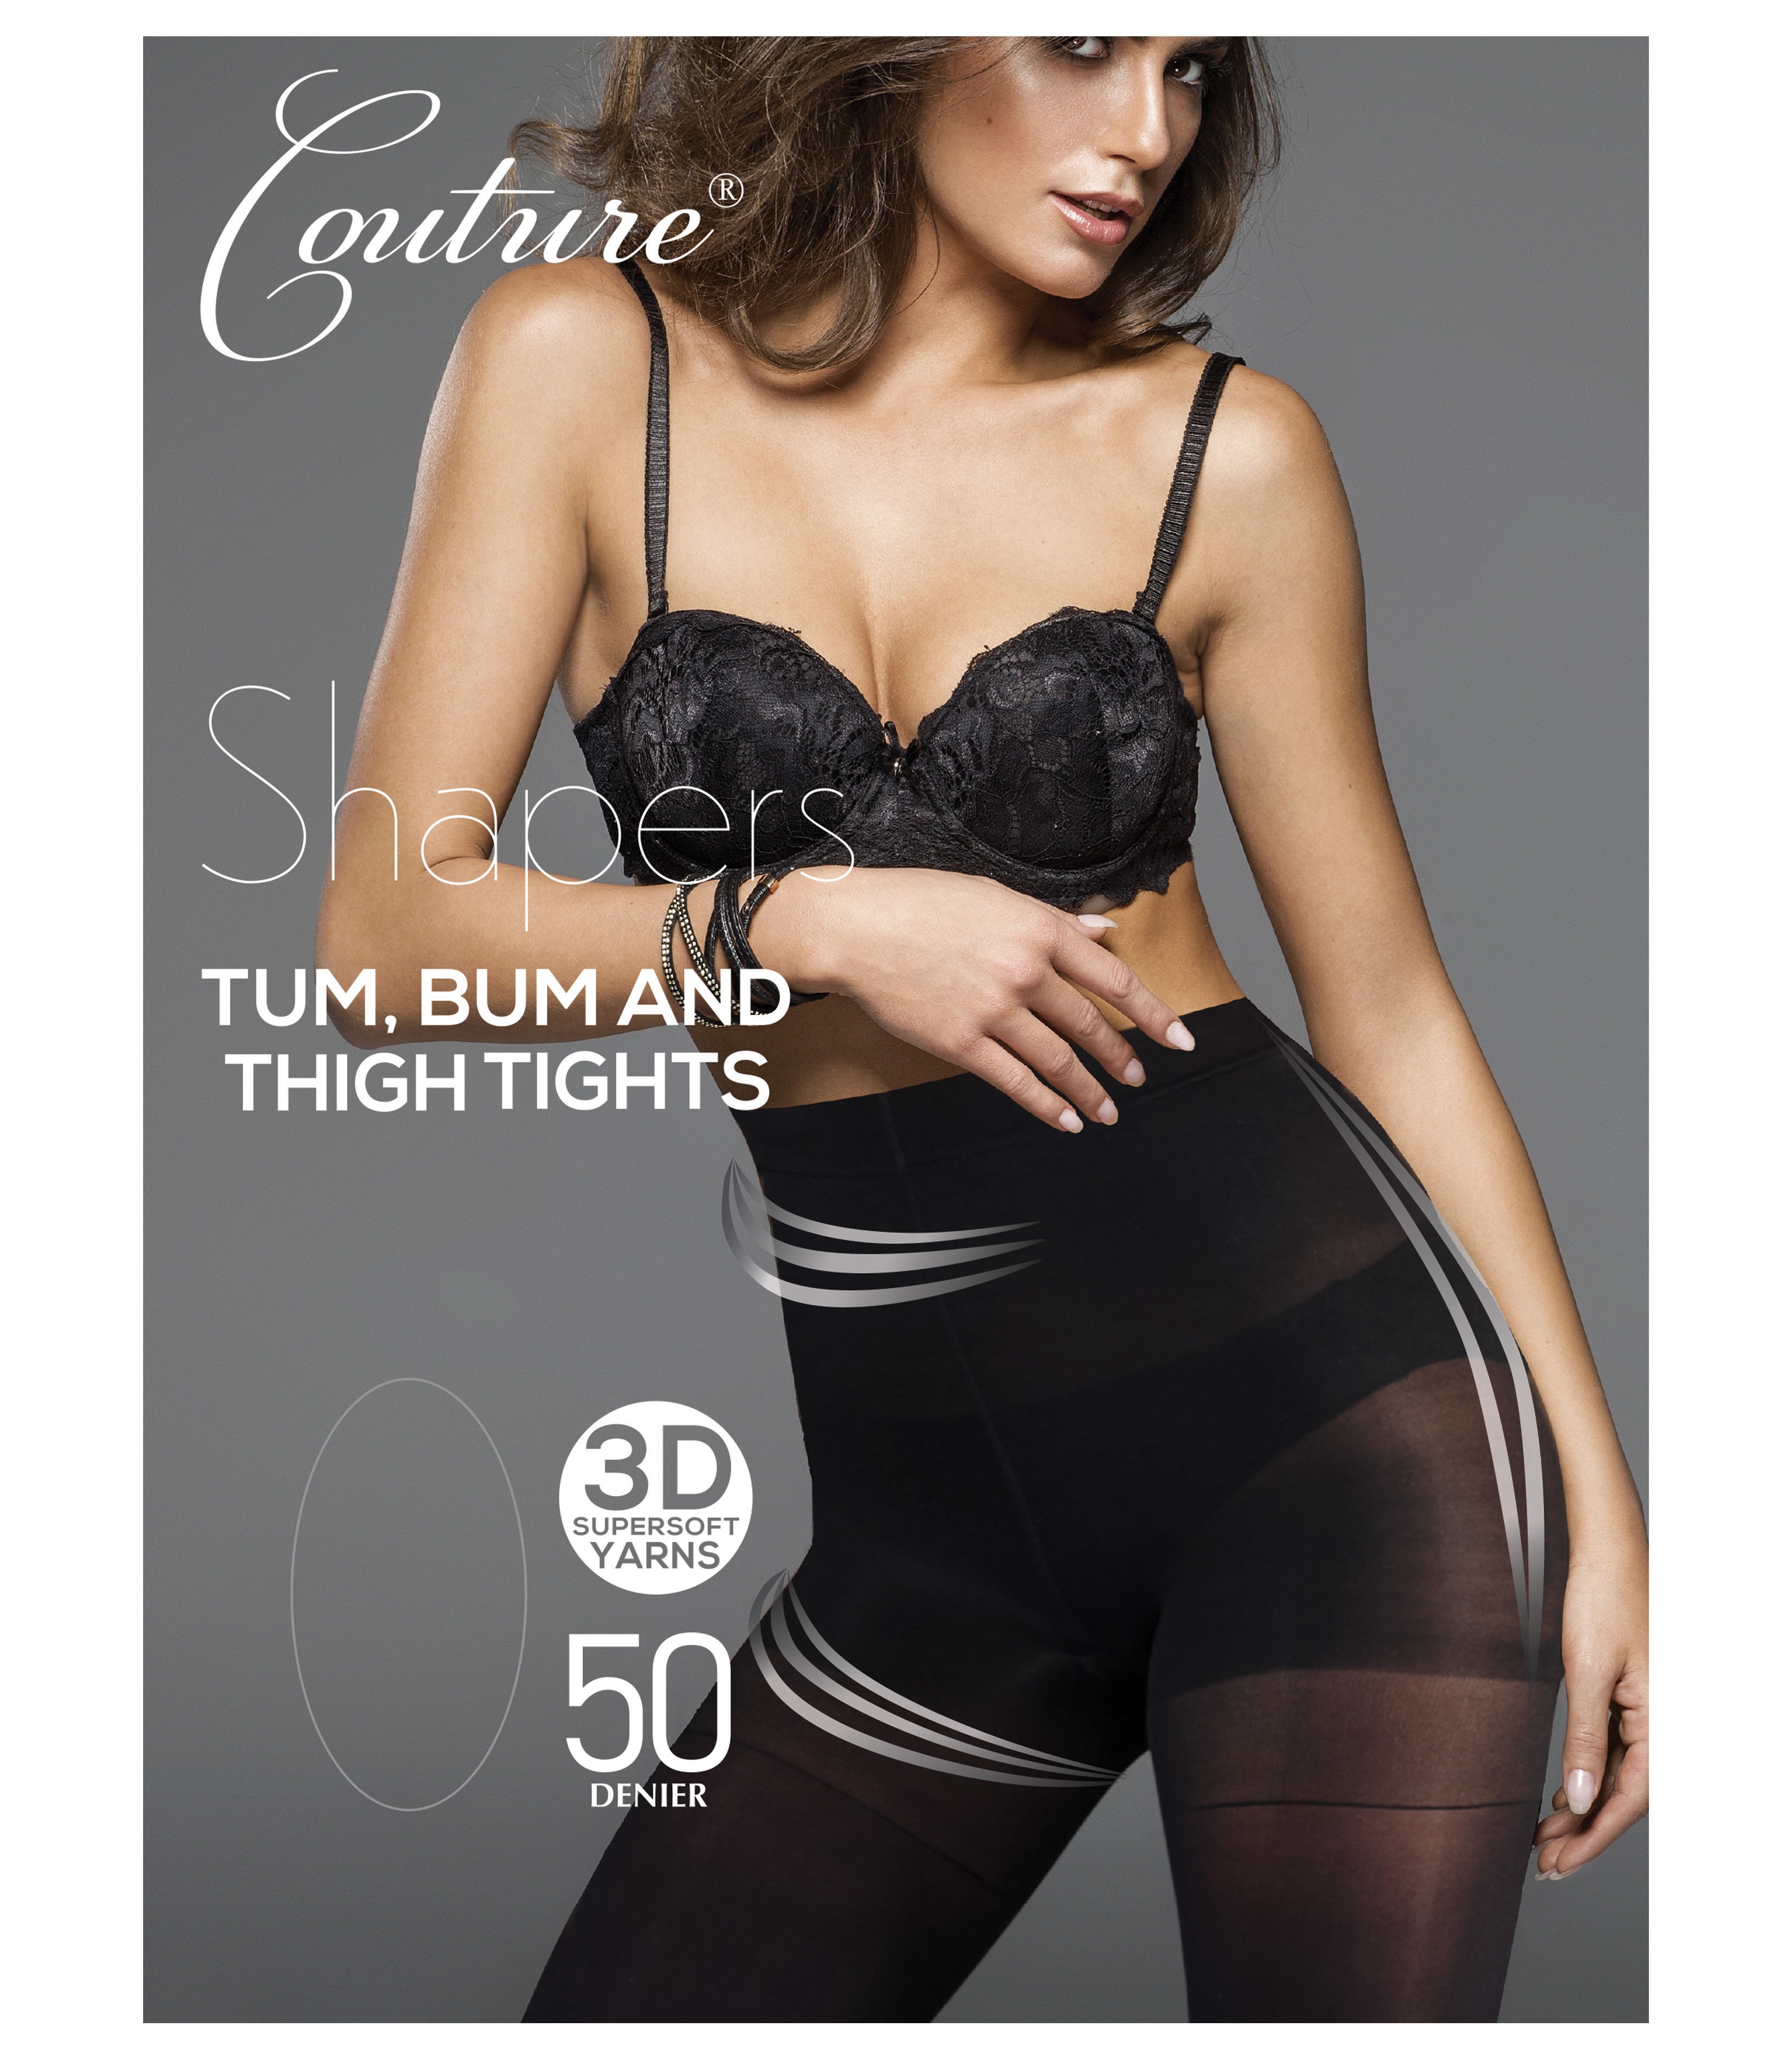 Couture Shapers Tum Bum and Thigh Tights 50 Denier Matte Leg